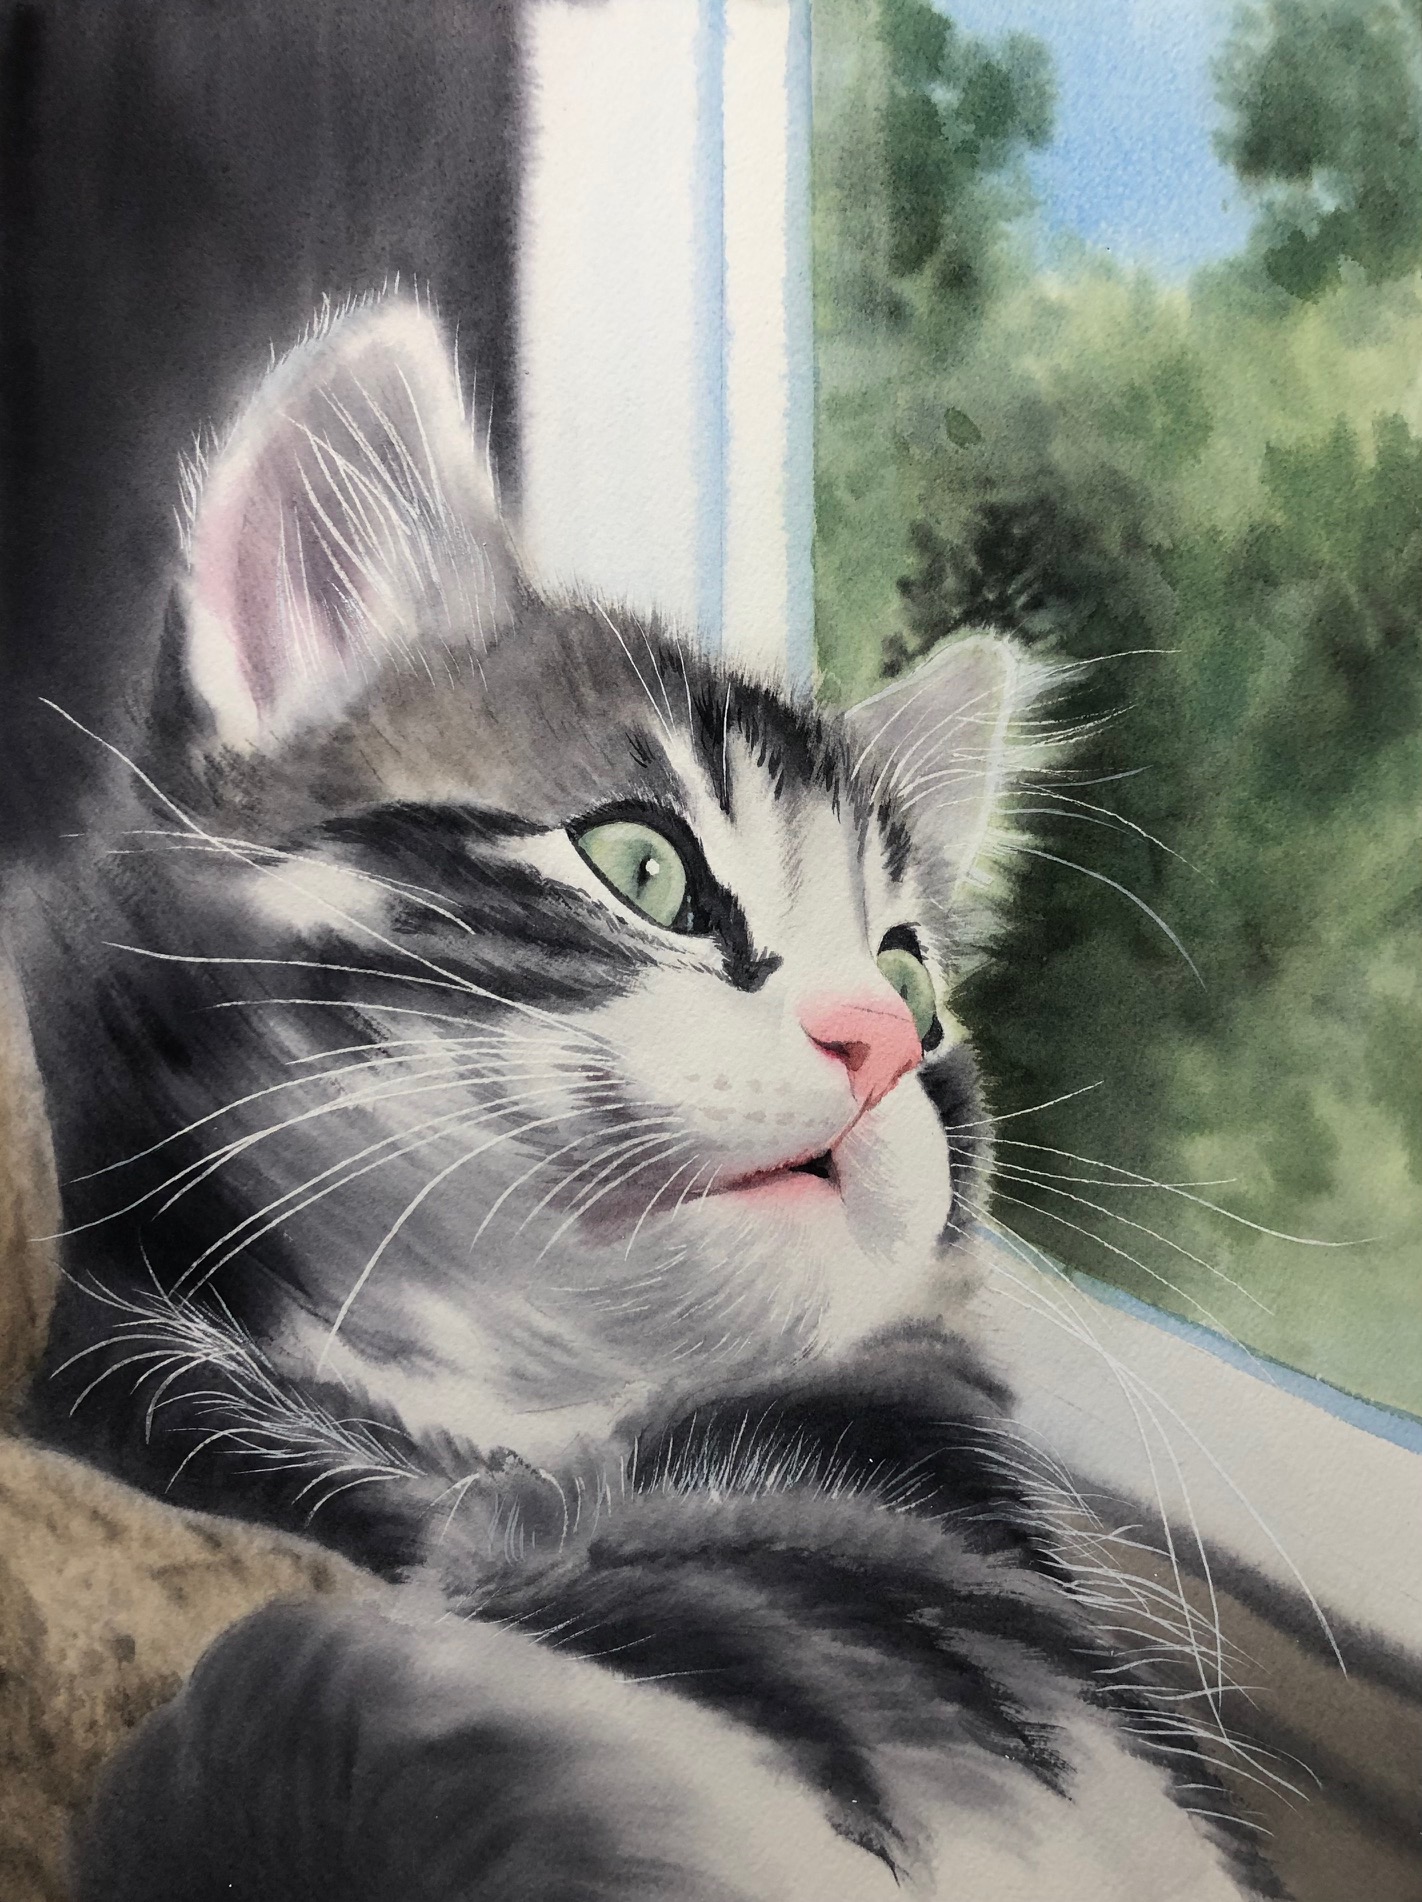 watercolor painting of a cat - Shelley Prior, "Sweet Kitten"